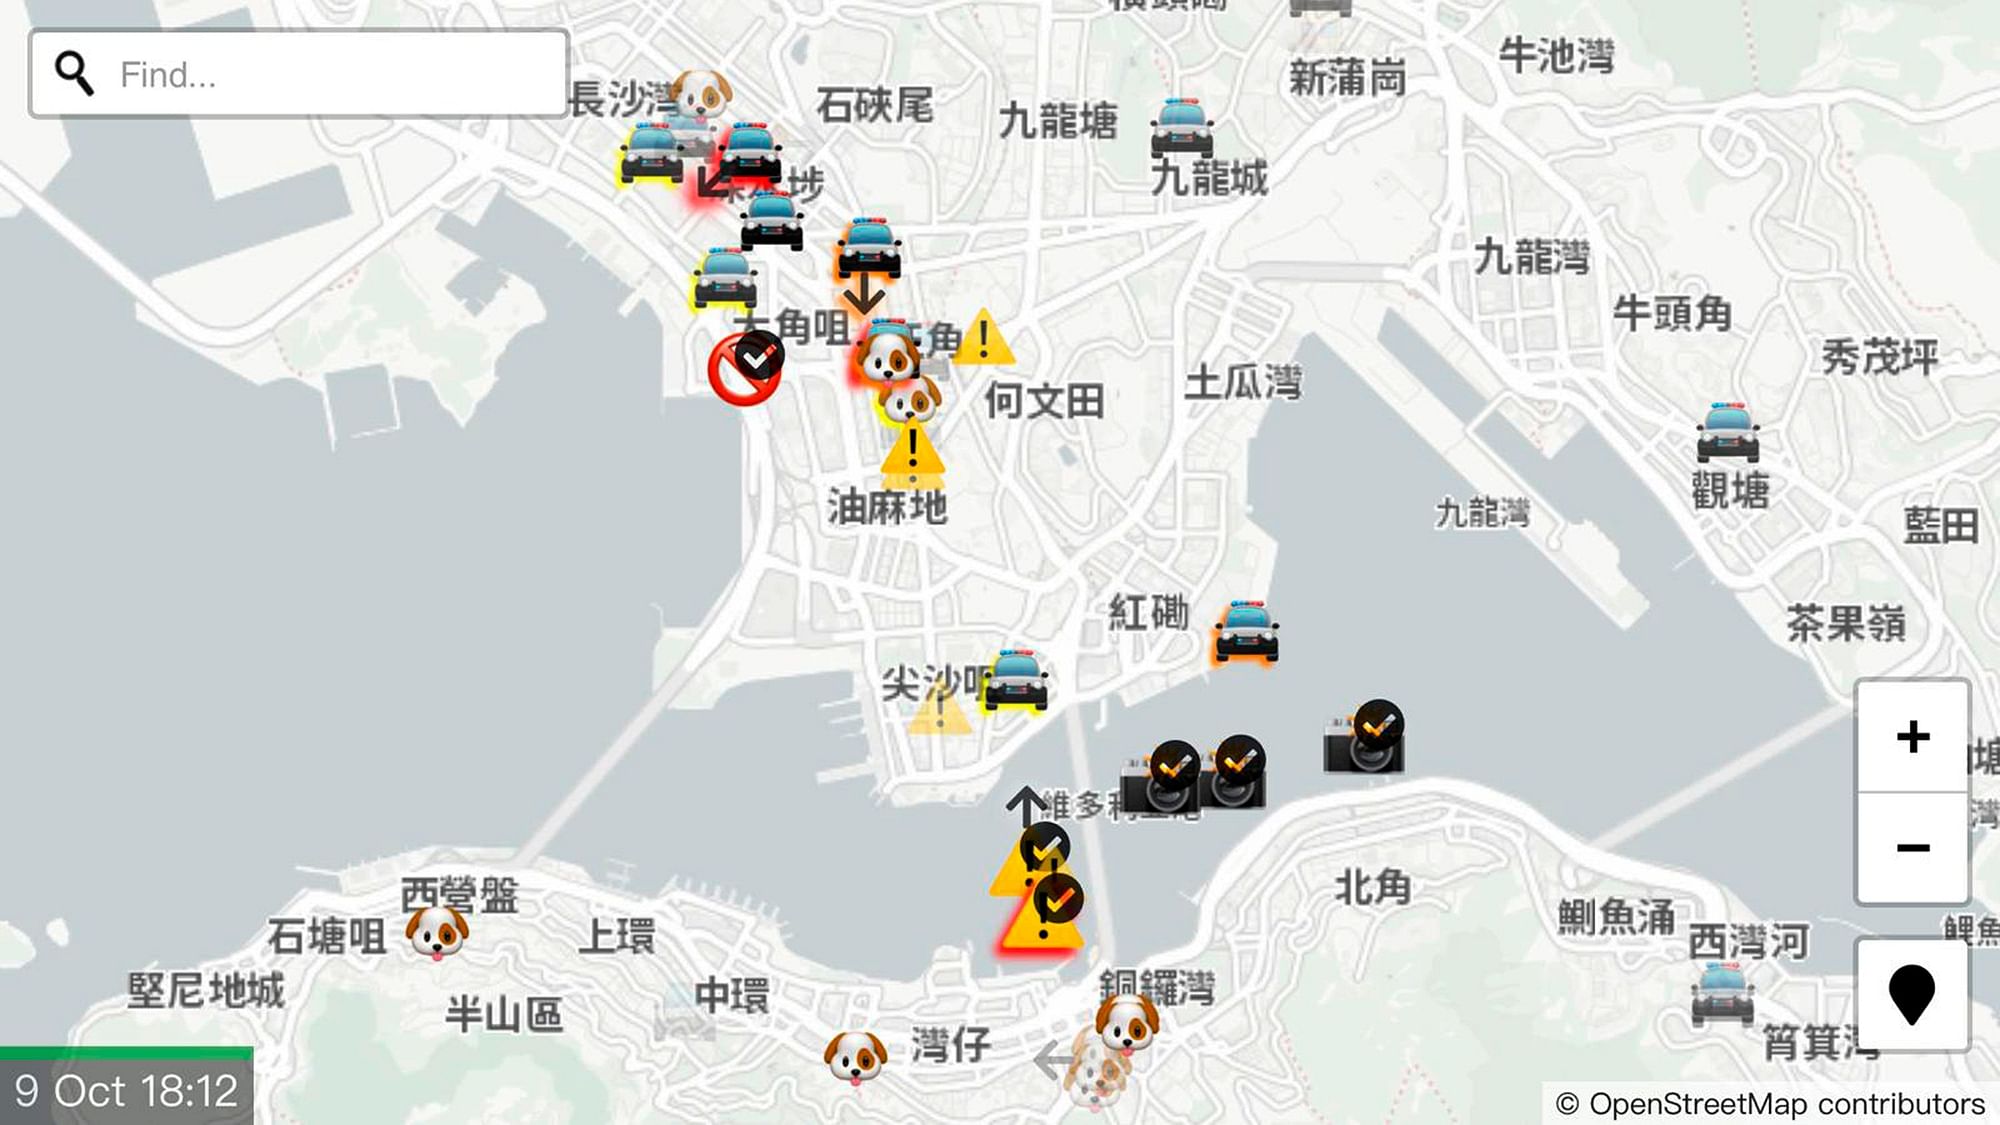 The app that showed the protesters police movement within the city.